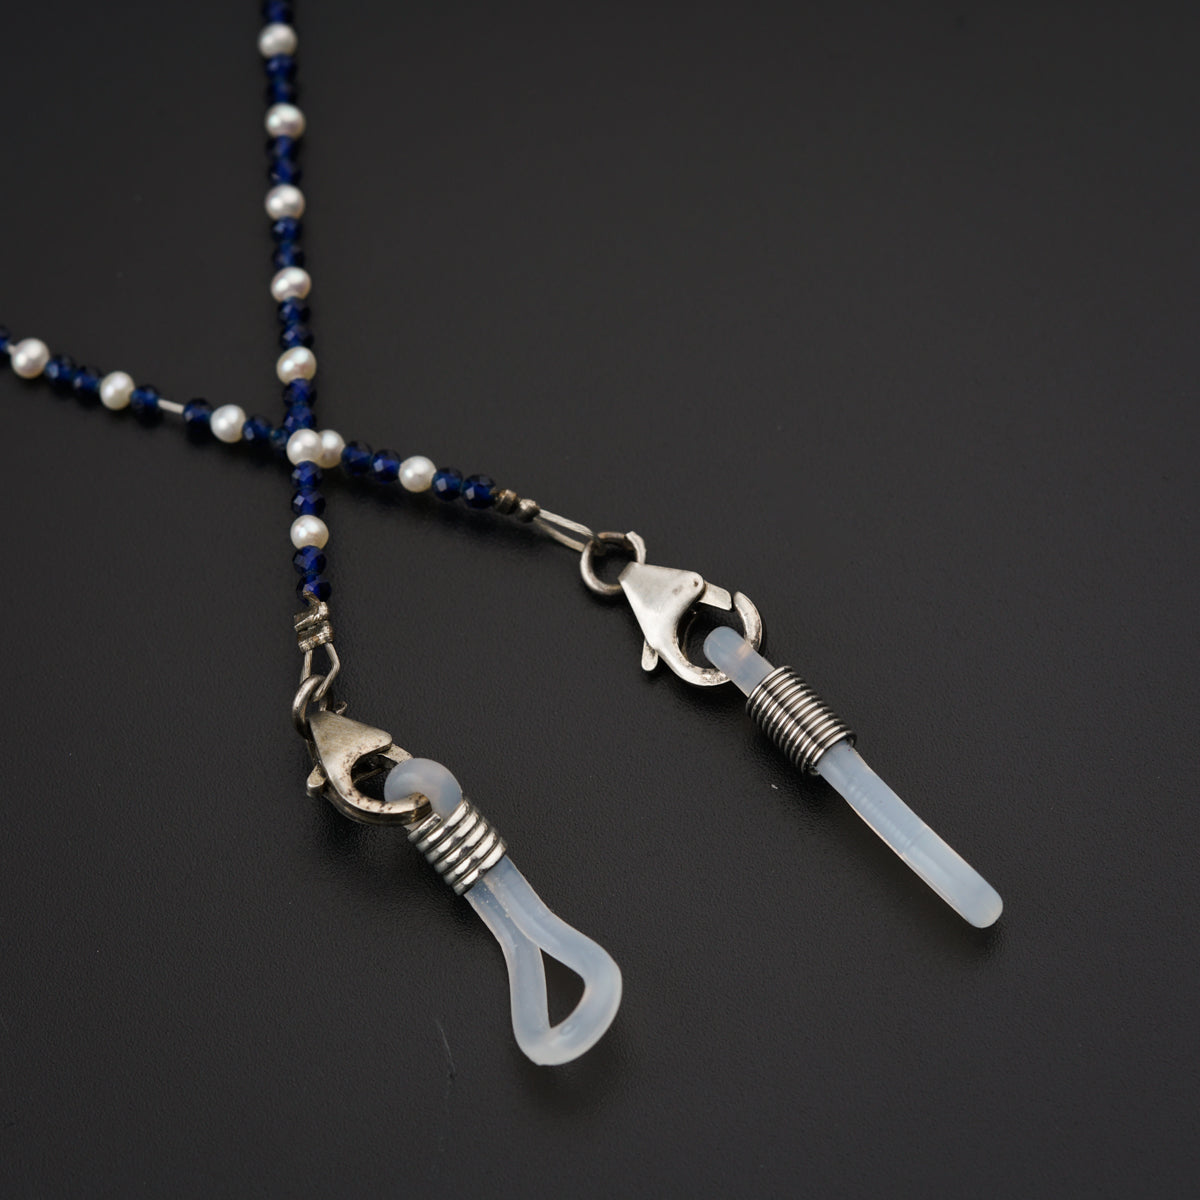 a necklace with a pair of scissors hanging from it